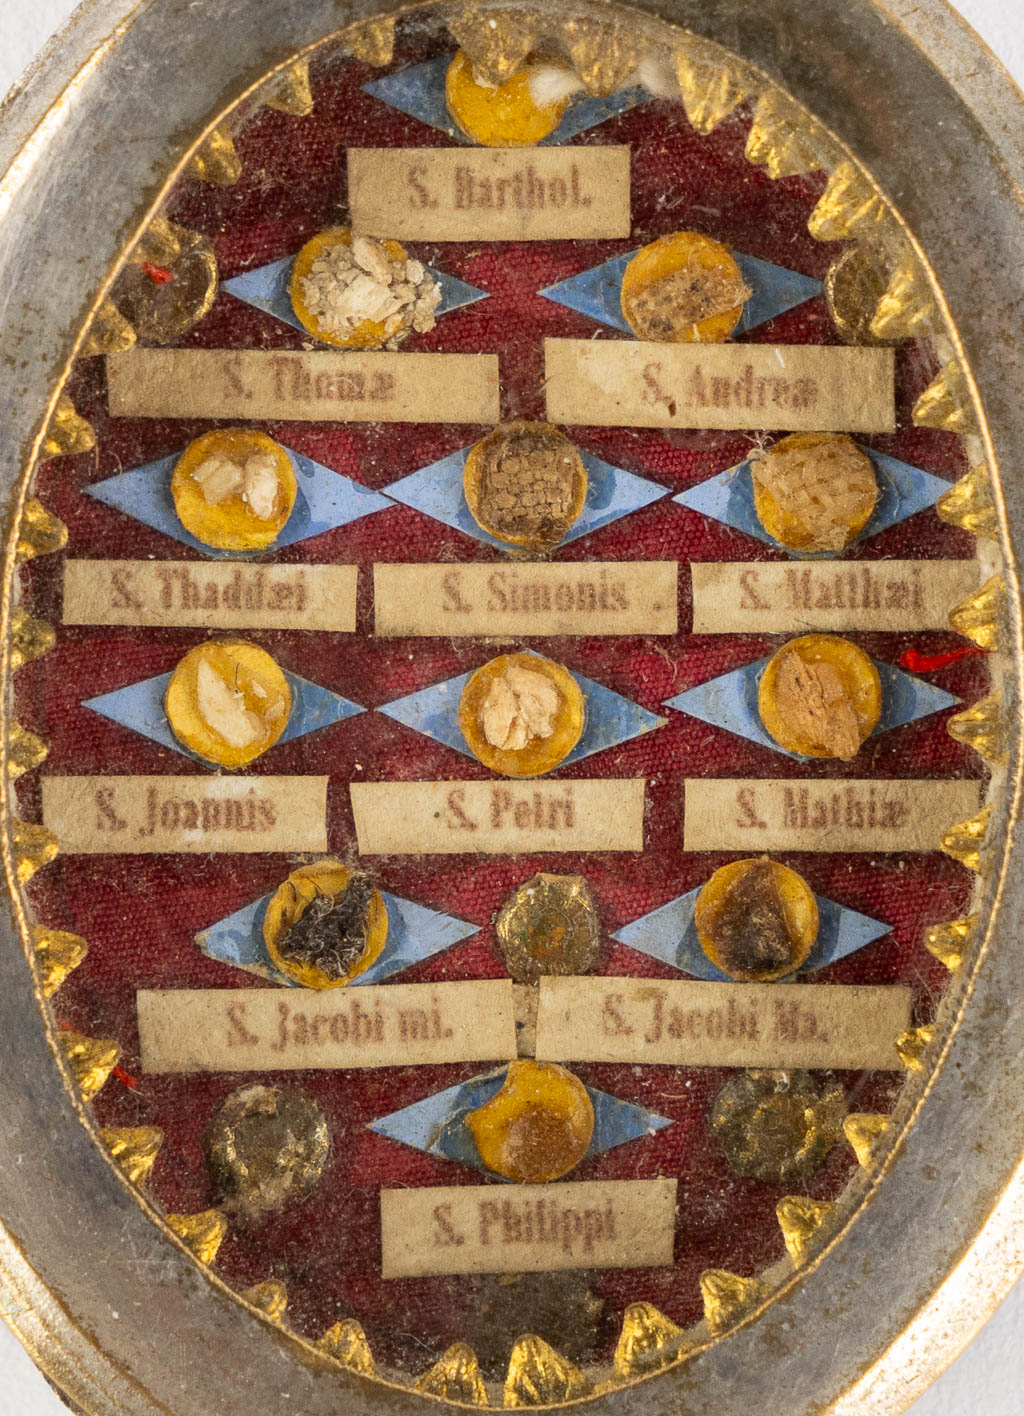 A sealed theca with relics for 12 apostles. (W:4,5 x H:6,5 cm)